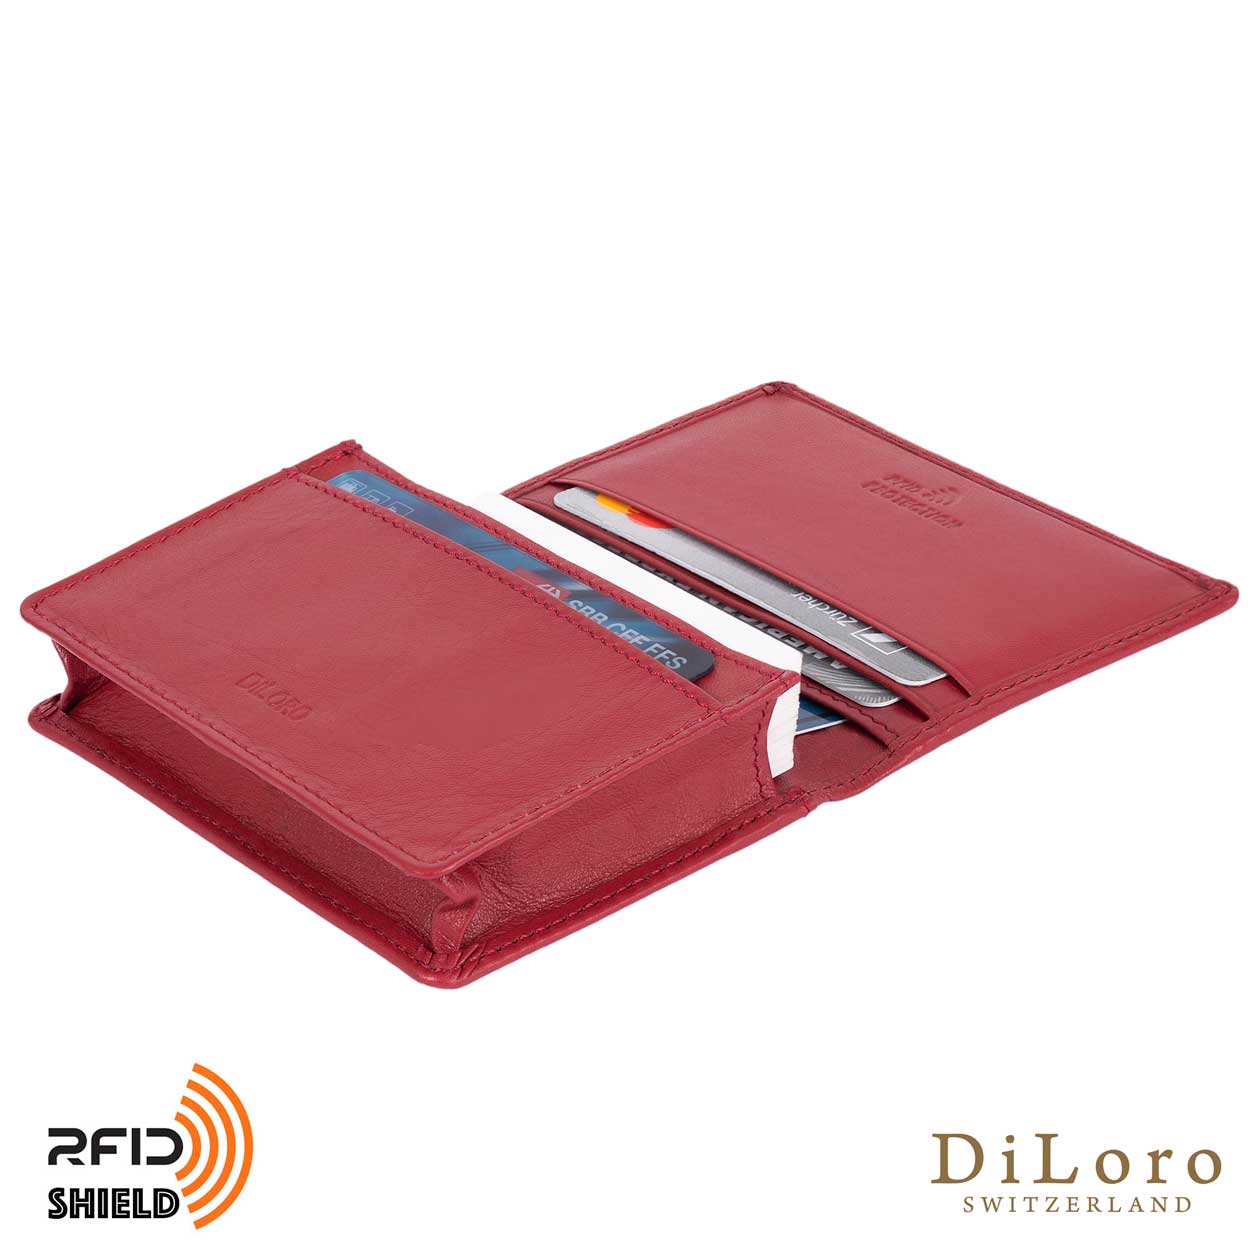 DiLoro Travel Leather Business Card Wallet Red - Open, Inside View 